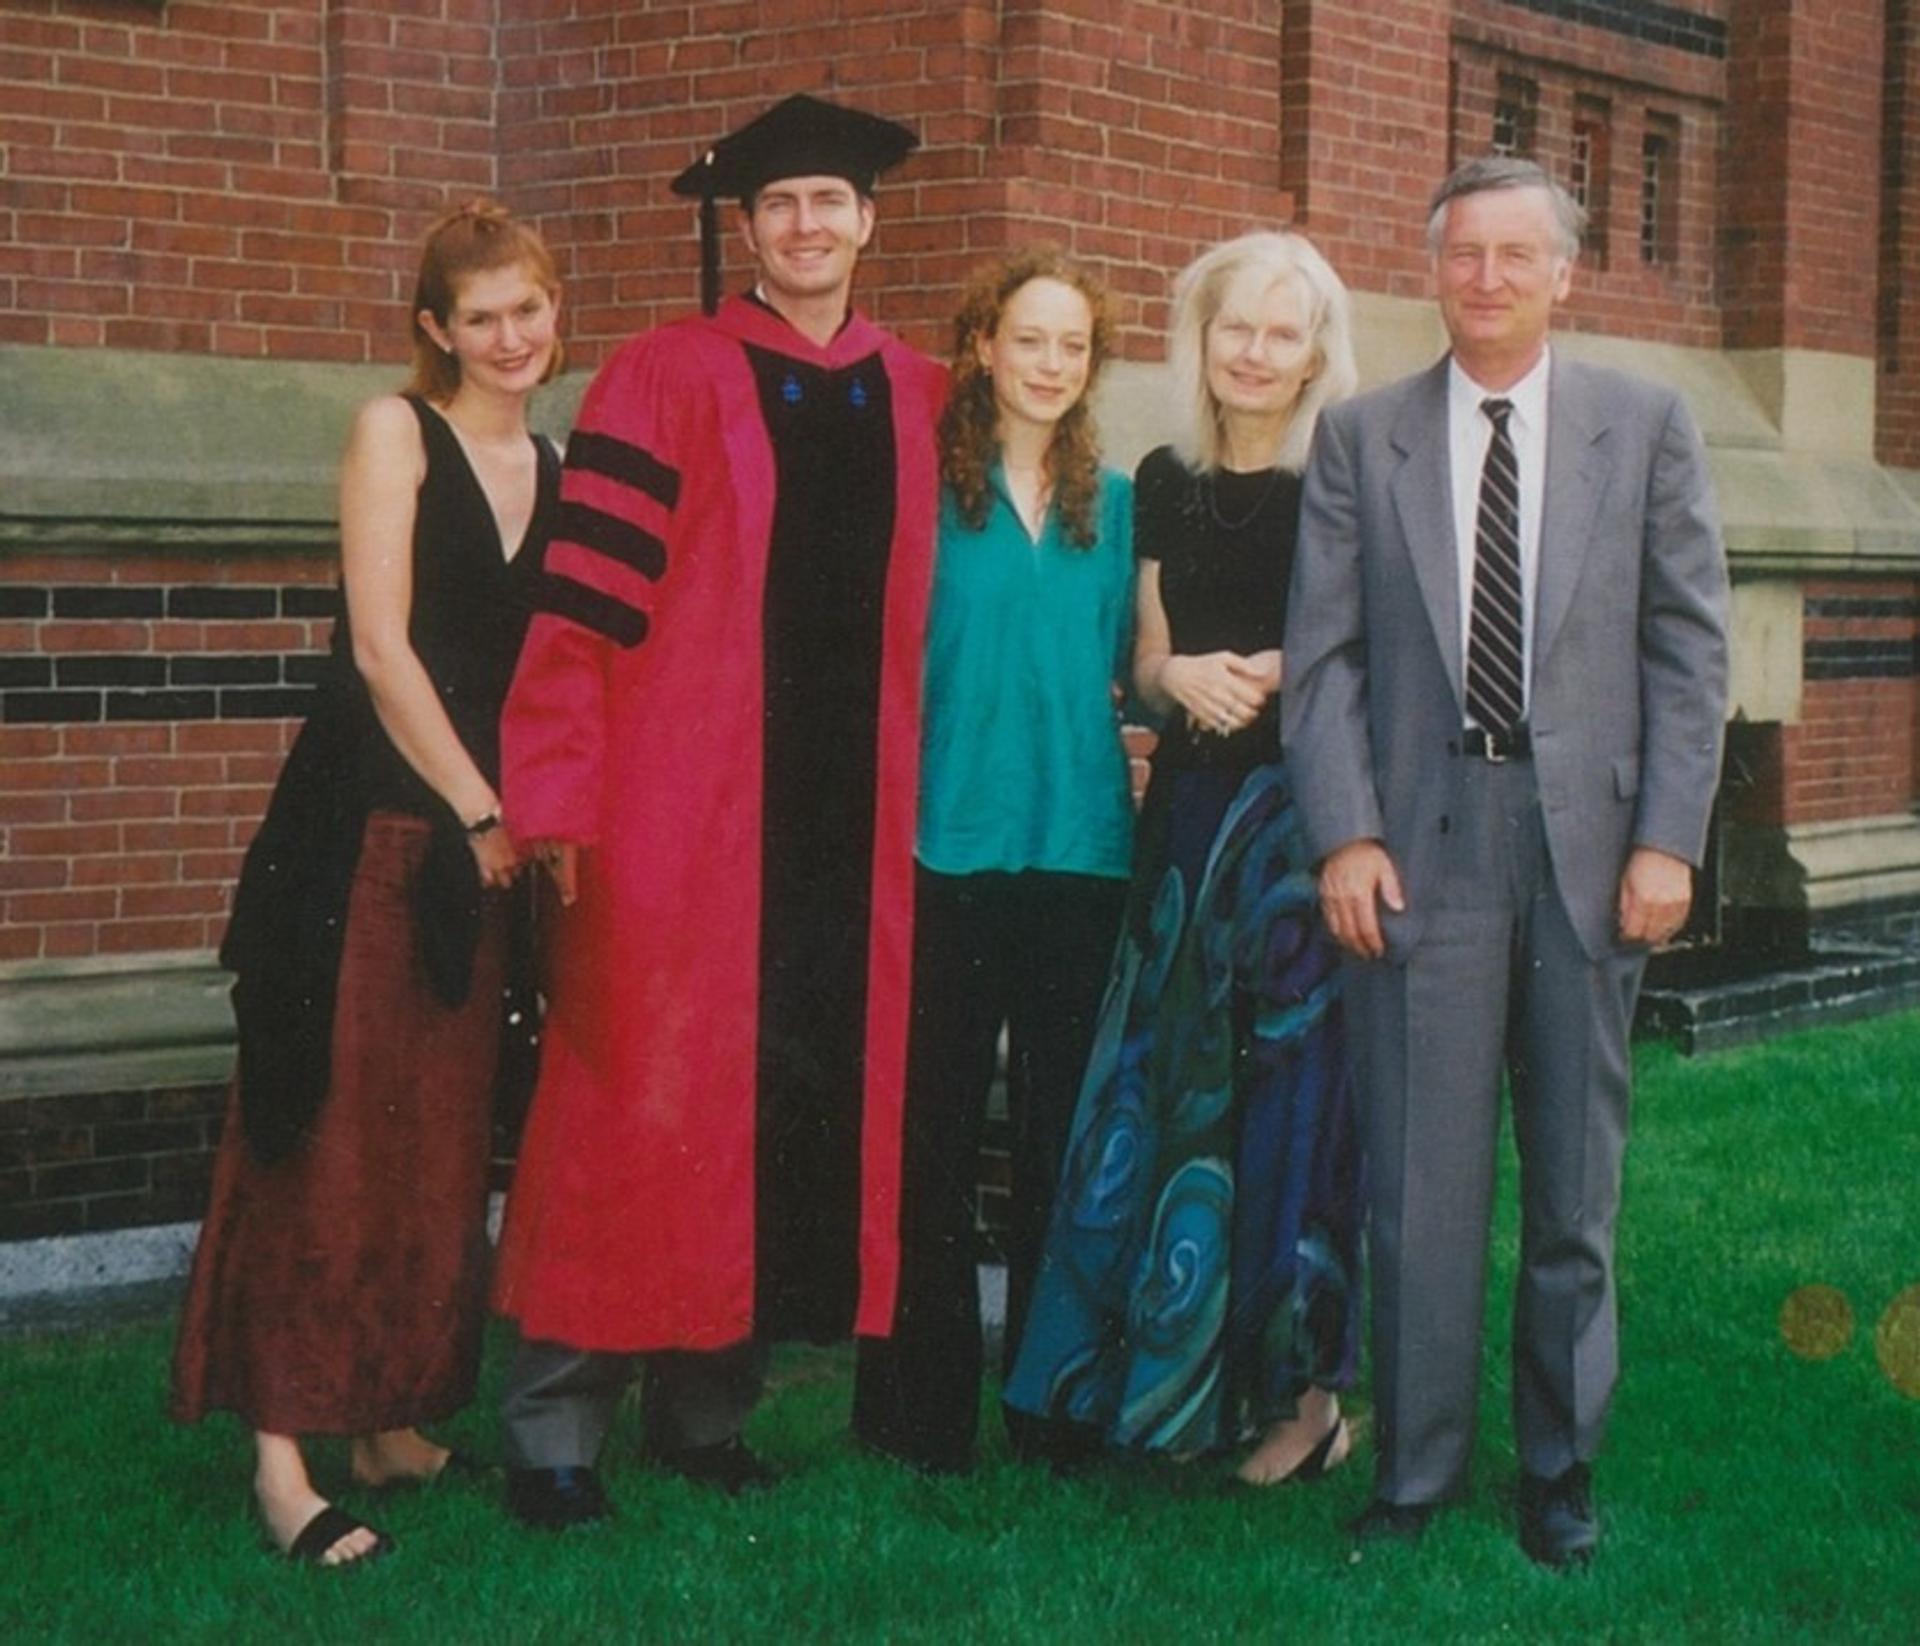 I received my PhD in Astronomy from Harvard. From left to right are my sister Christine, myself, Margaret Bourdeaux, and my mother and father.